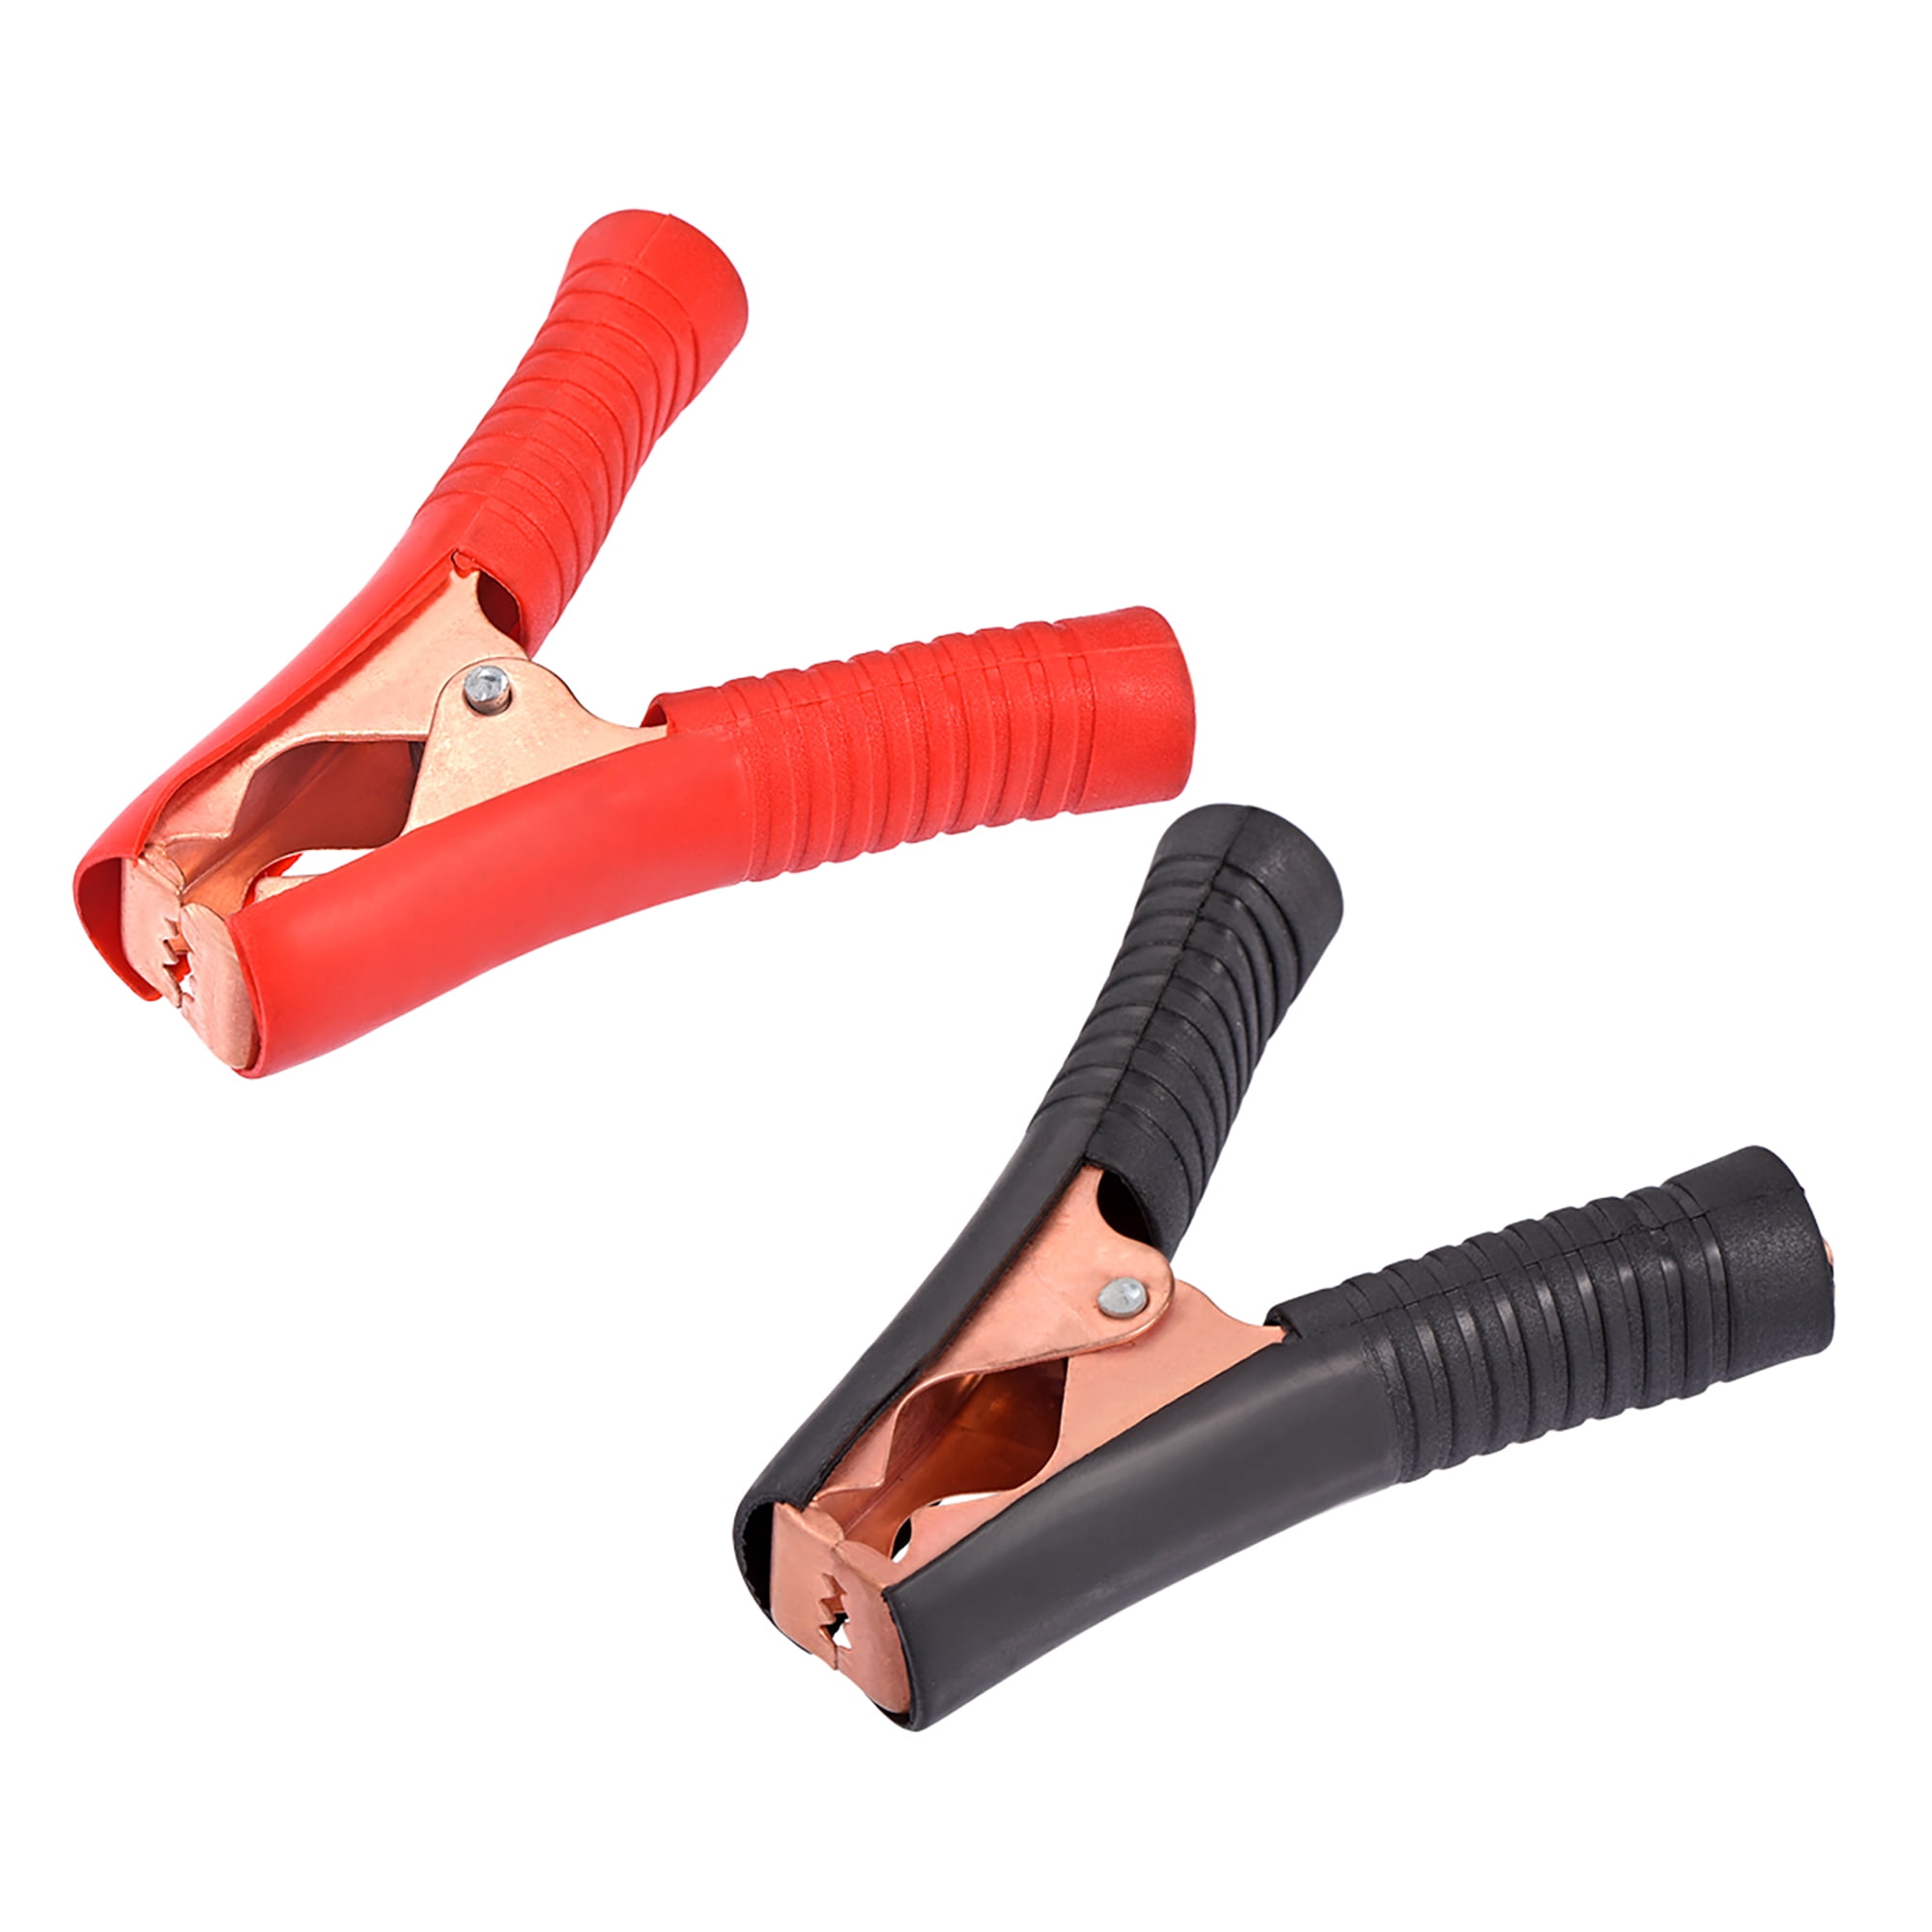 2Pcs Red&Black Car Battery Charger Clamp Alligator Clip for Jump Starter NewBBE 